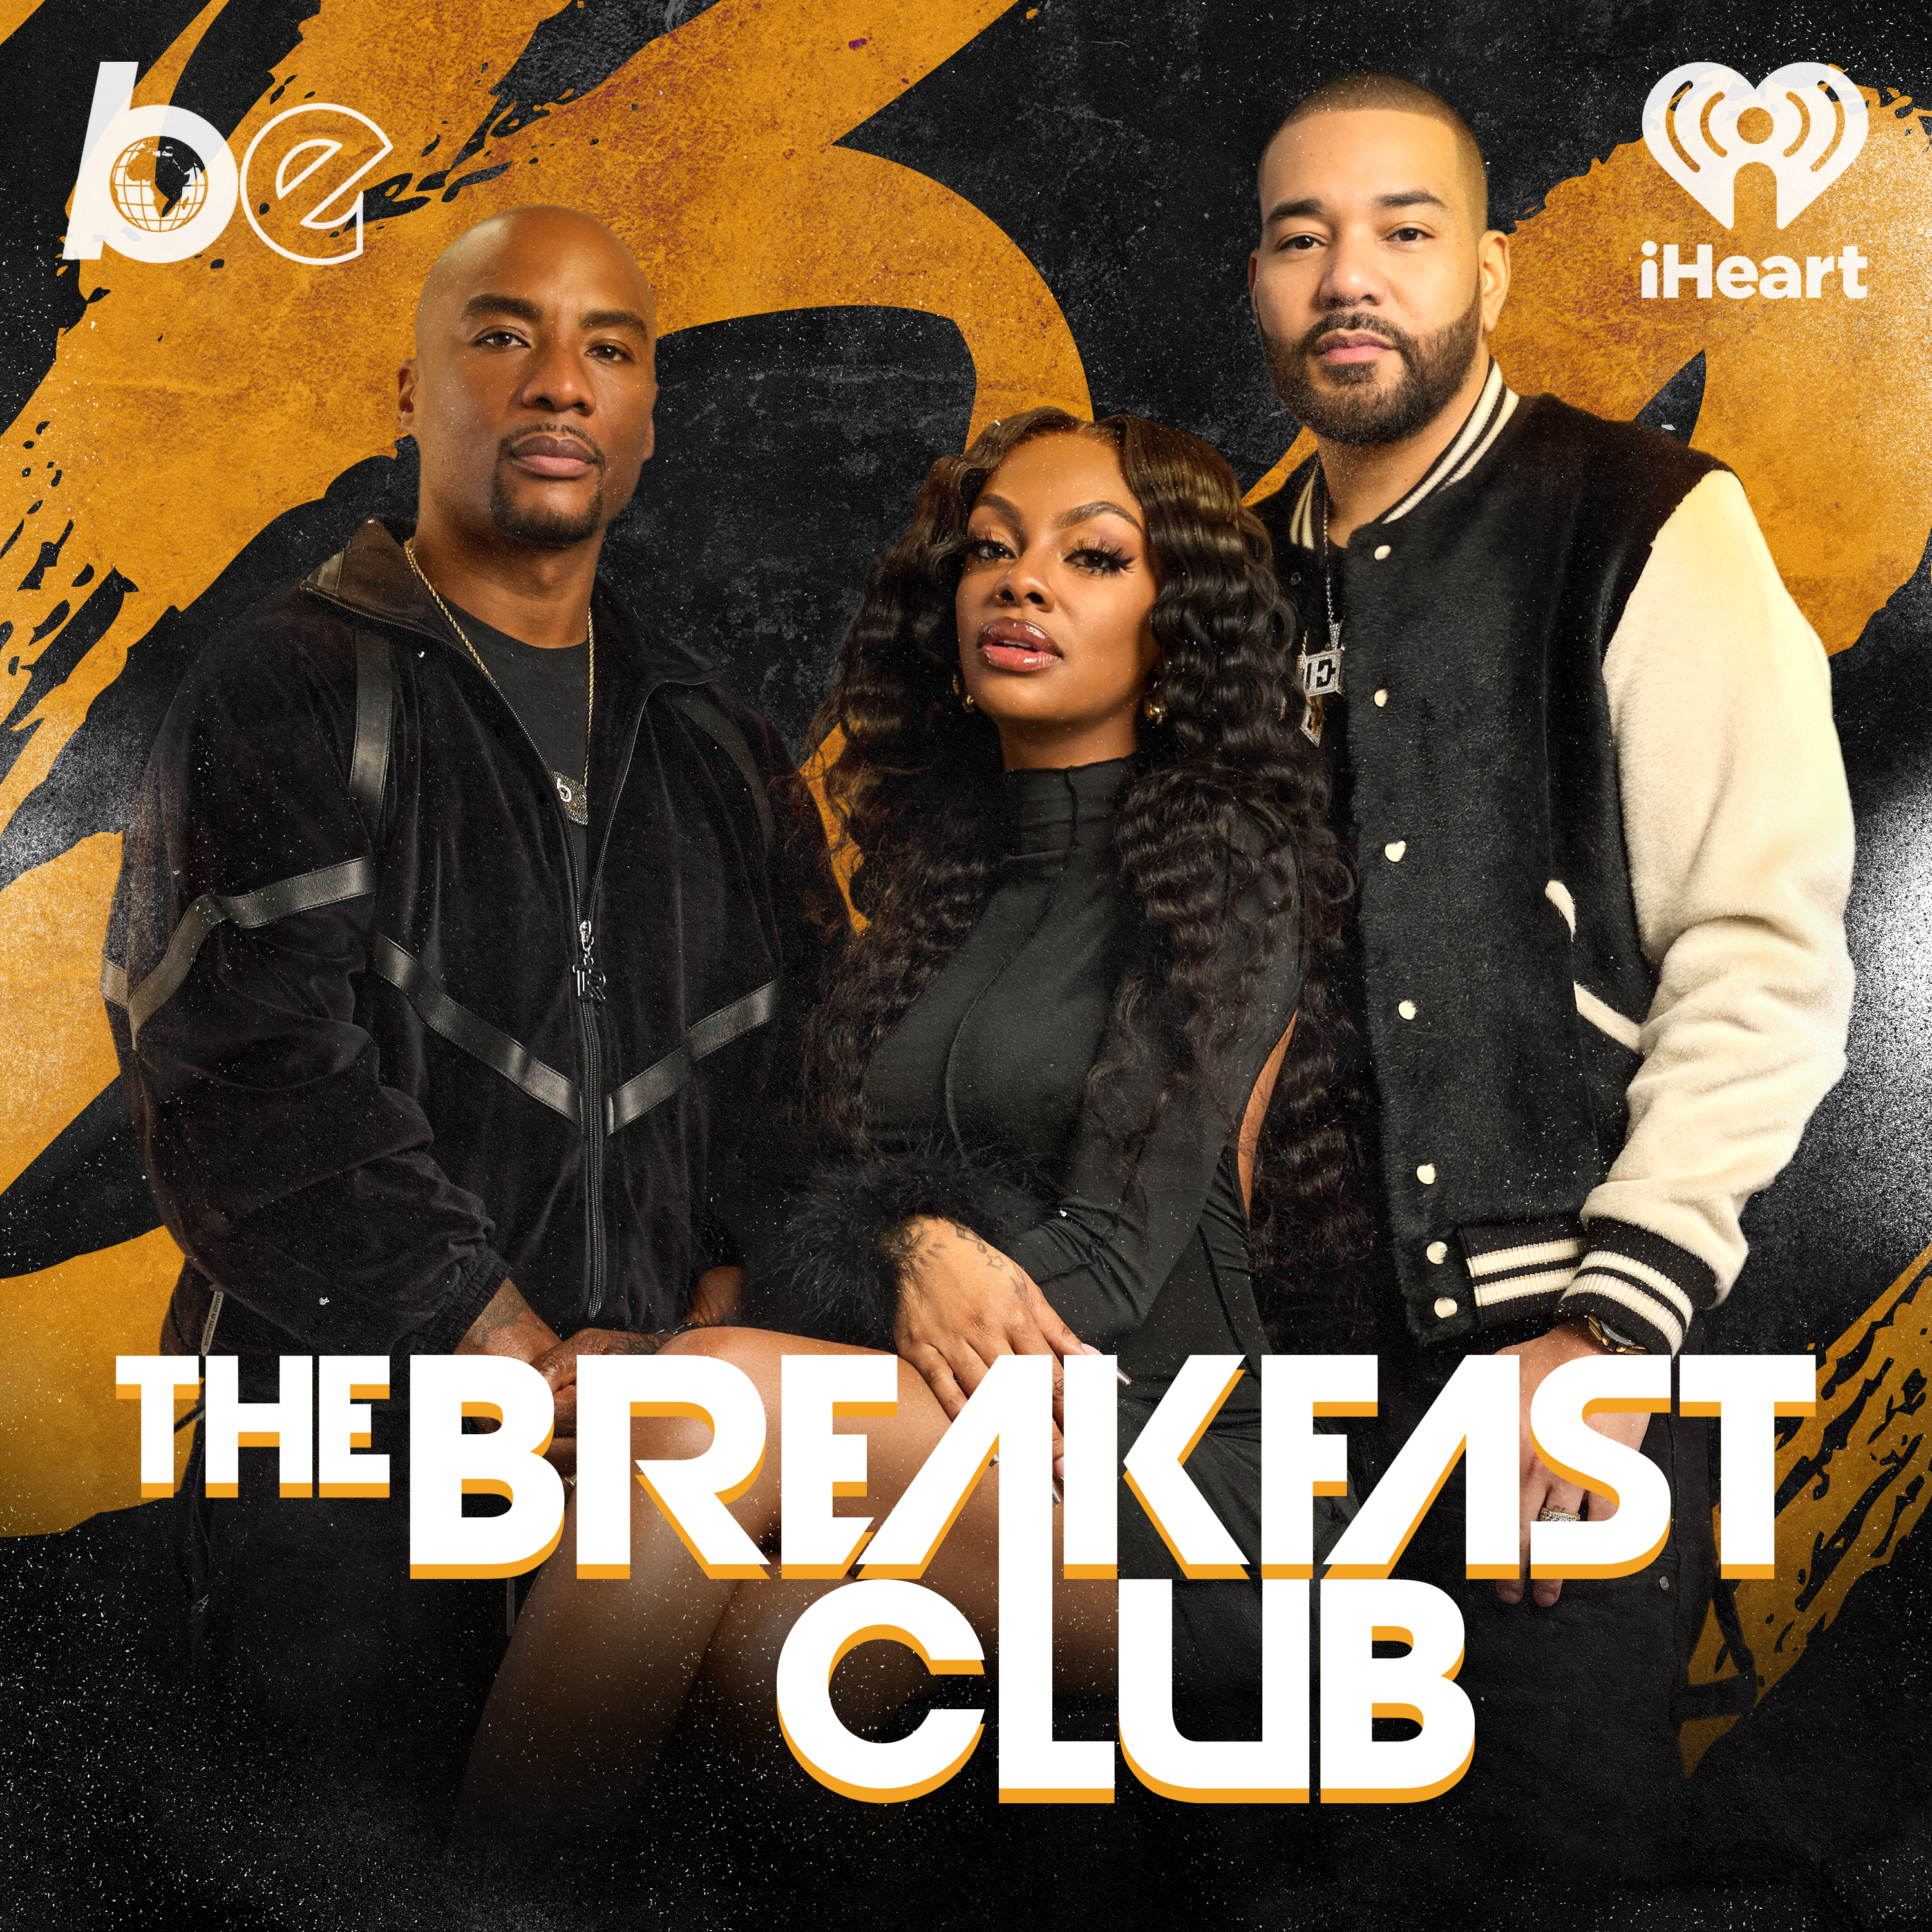 FULL SHOW: T.I. Goes Off On Club Promoters For Flyer Of Him & His Son, Mike Tyson Punch Victim Demands $450K, Teynana Taylor Breaks Silence Amid Divorce Leak, Bronny James Fully Cleared To Return To USC, DJ Nyla Symone Reviews Renaissance: A Film By Beyoncé, Talks Jack Harlow, 2 Chainz, Lil Wayne + More (Guest Host: Ivy Revera)